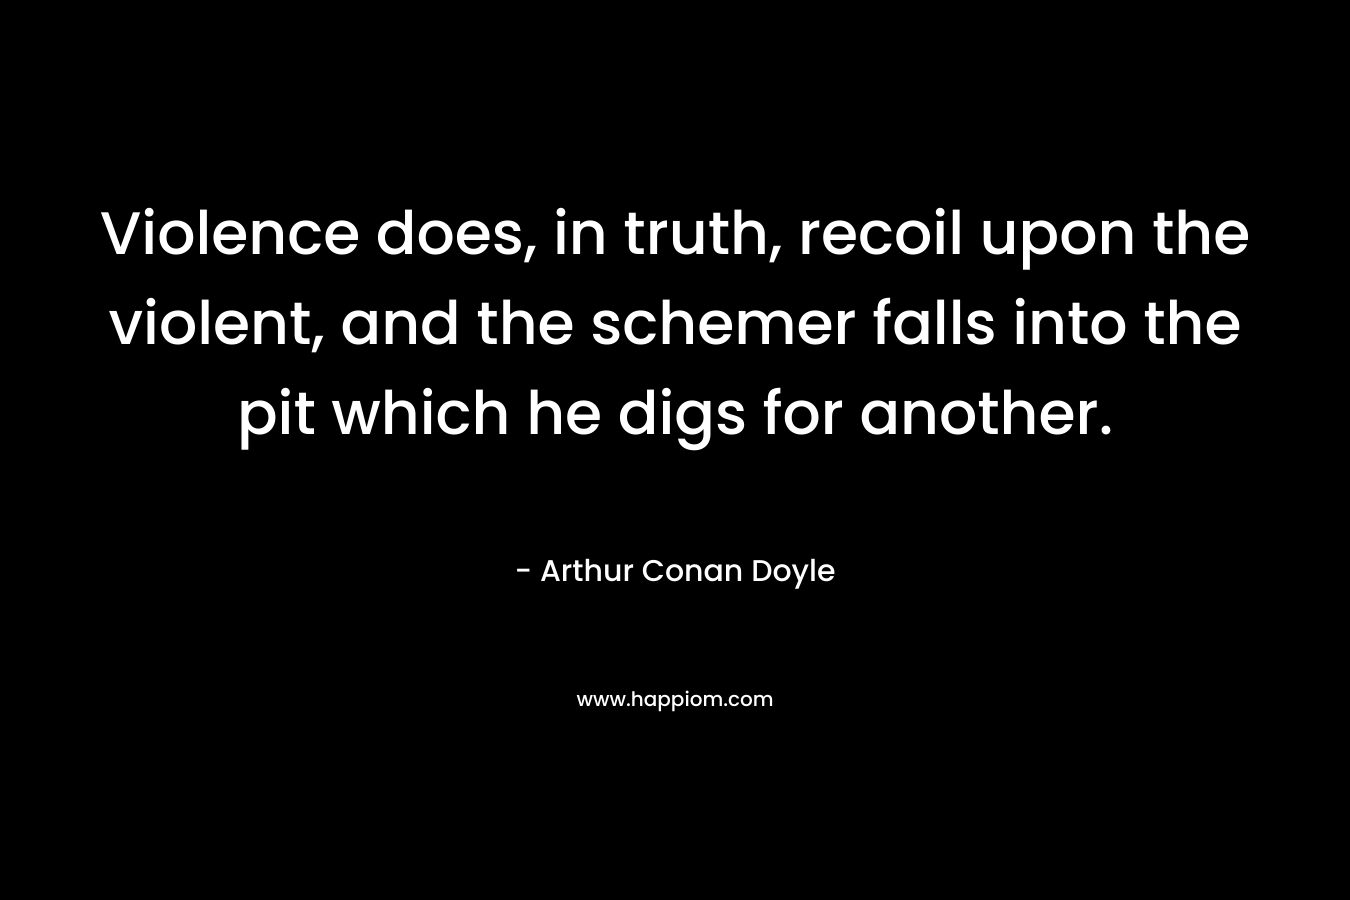 Violence does, in truth, recoil upon the violent, and the schemer falls into the pit which he digs for another. – Arthur Conan Doyle